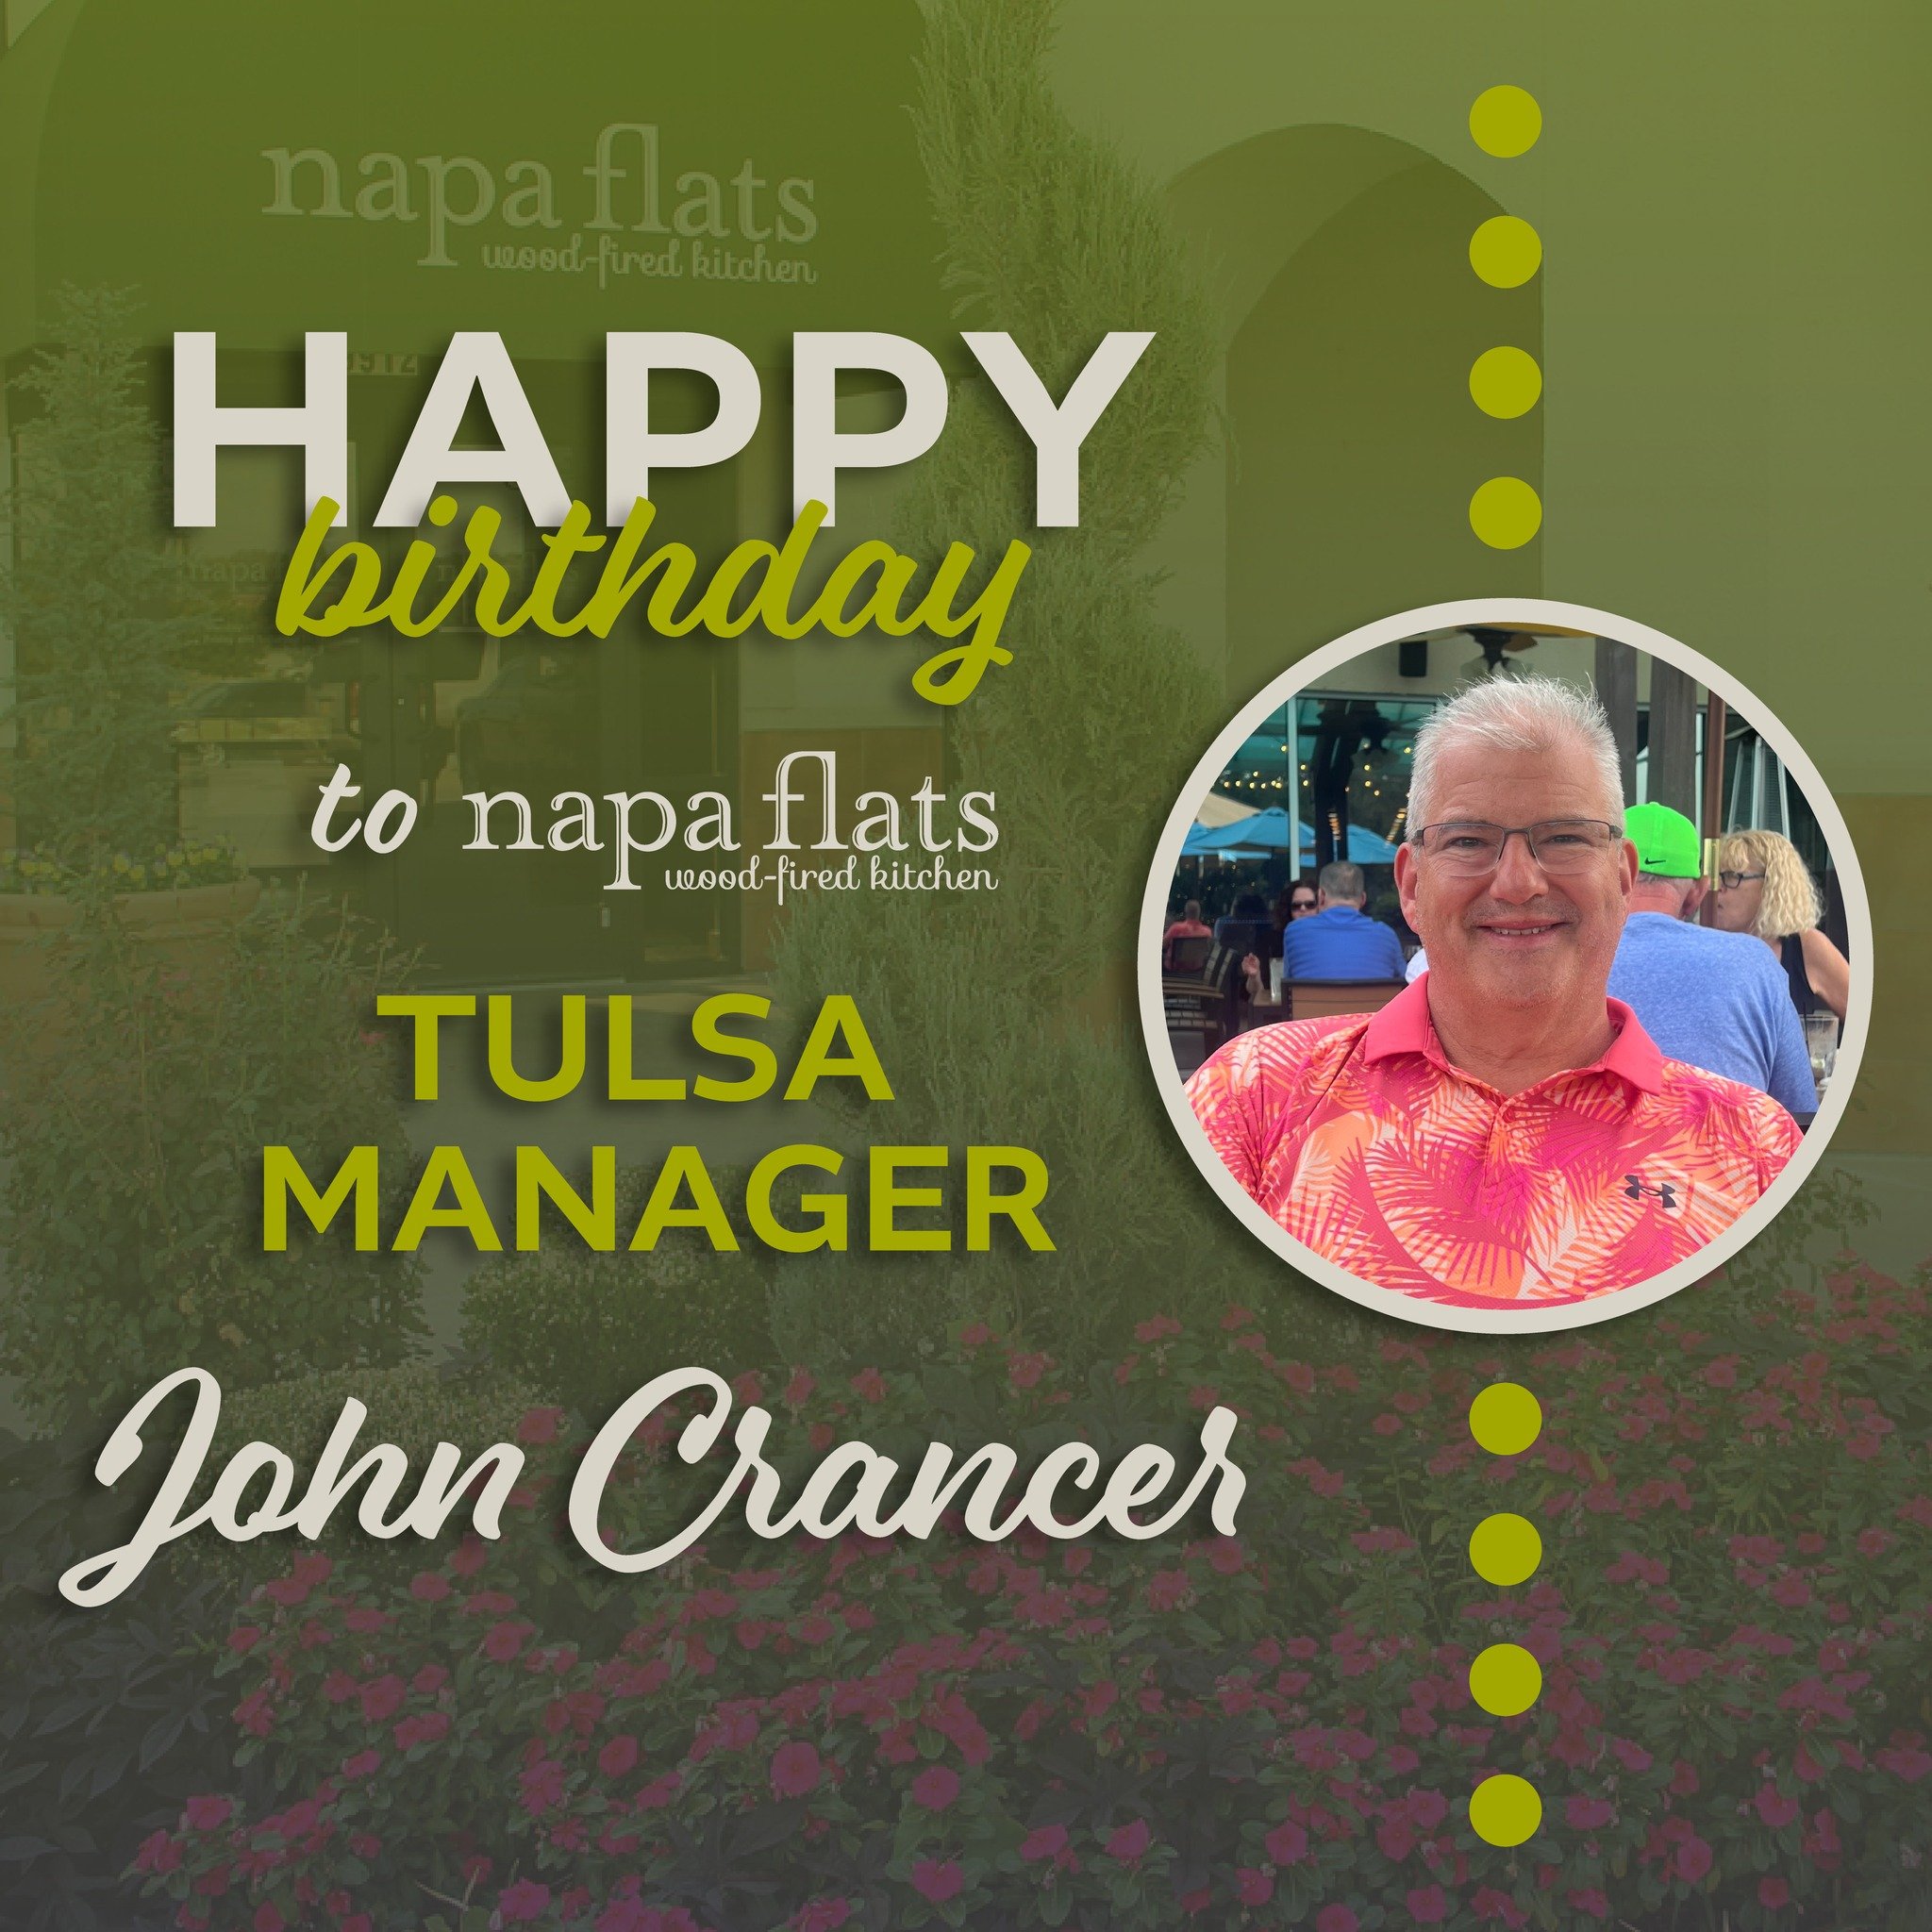 🎂🎉 On Cinco de Mayo, we have not one, but two reasons to celebrate! Happy Birthday to the remarkable manager of our Tulsa location, John Crancer, and a festive Cinco de Mayo to everyone! Swing by Napa Flats College Station for a day of fabulous foo